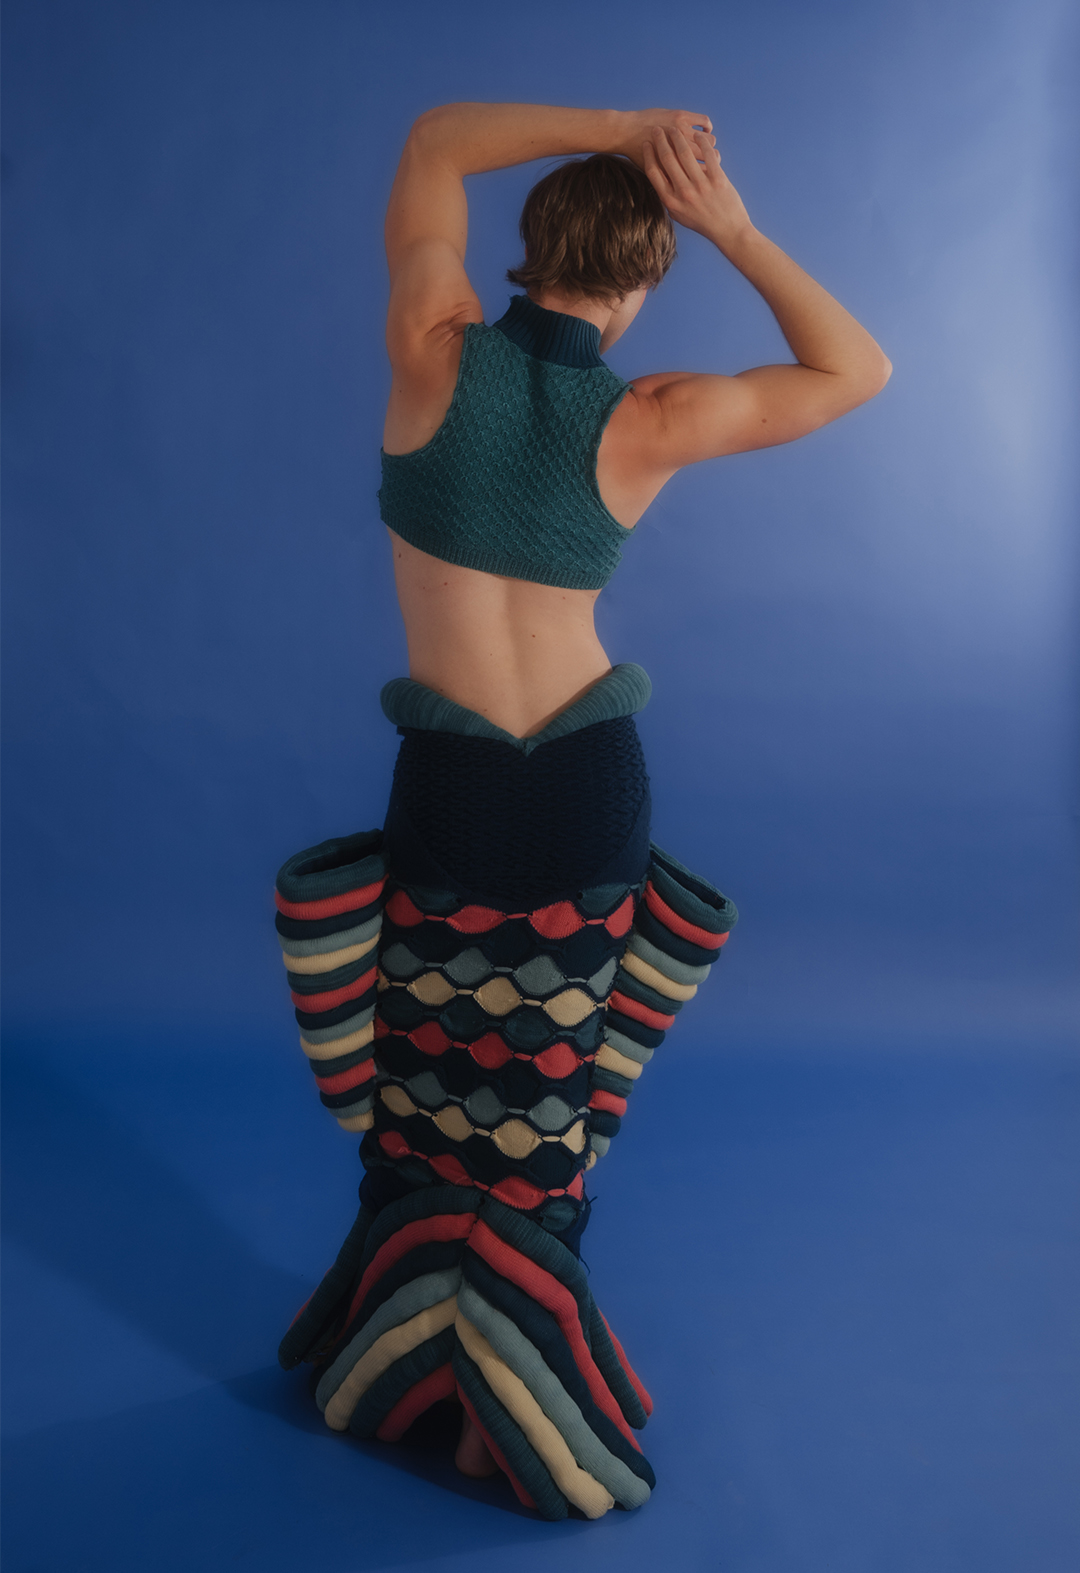 The photo shows a back view of the model wearing sculptural skirt and tank top.